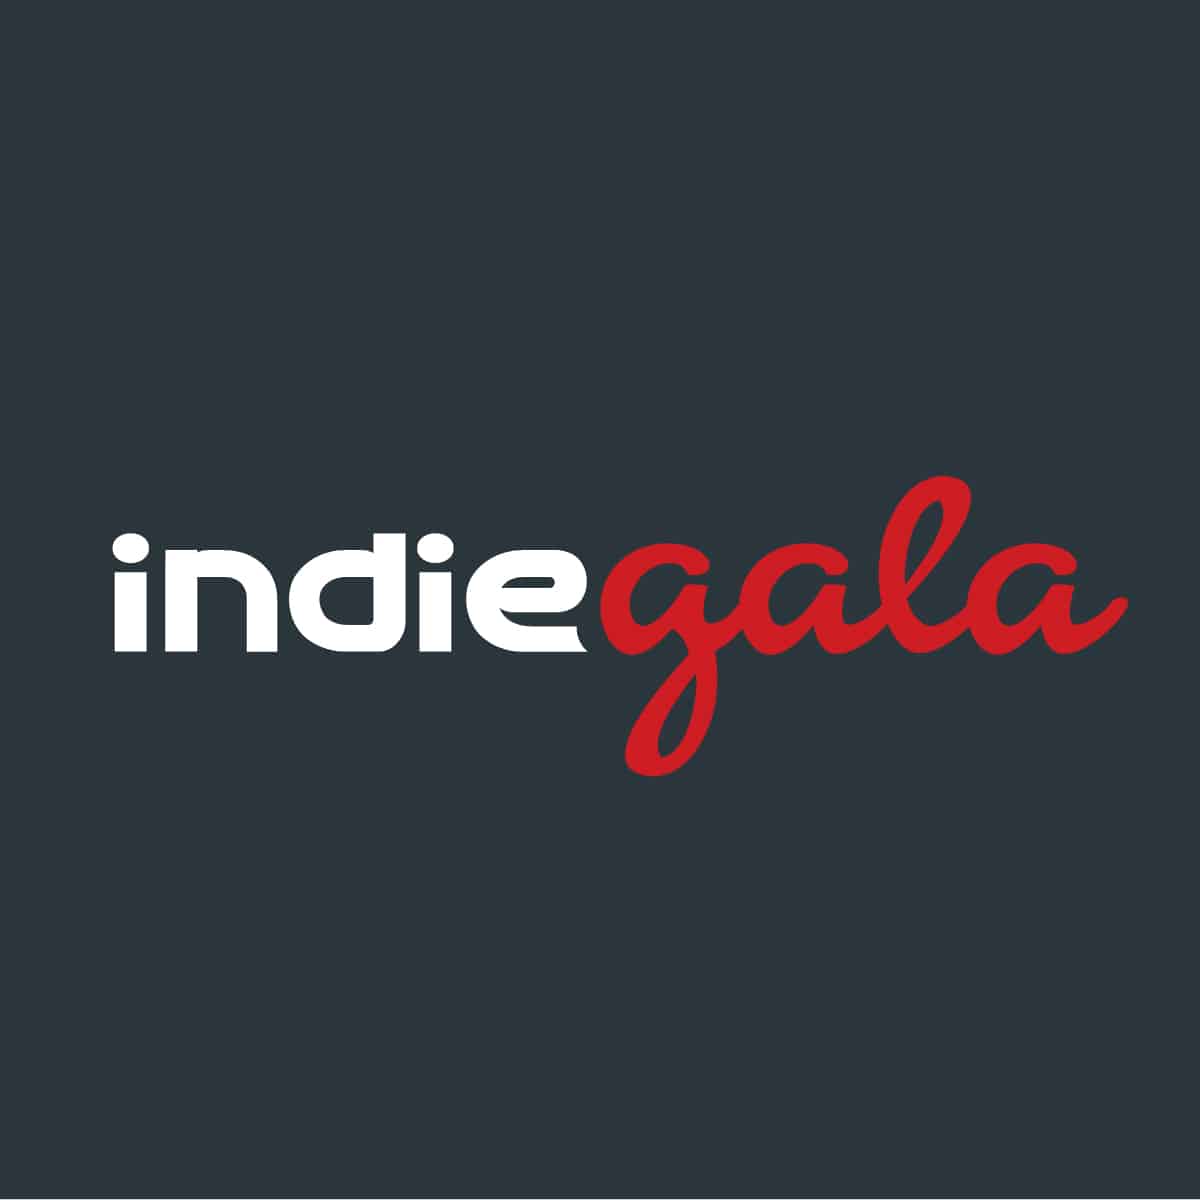 Indiegala